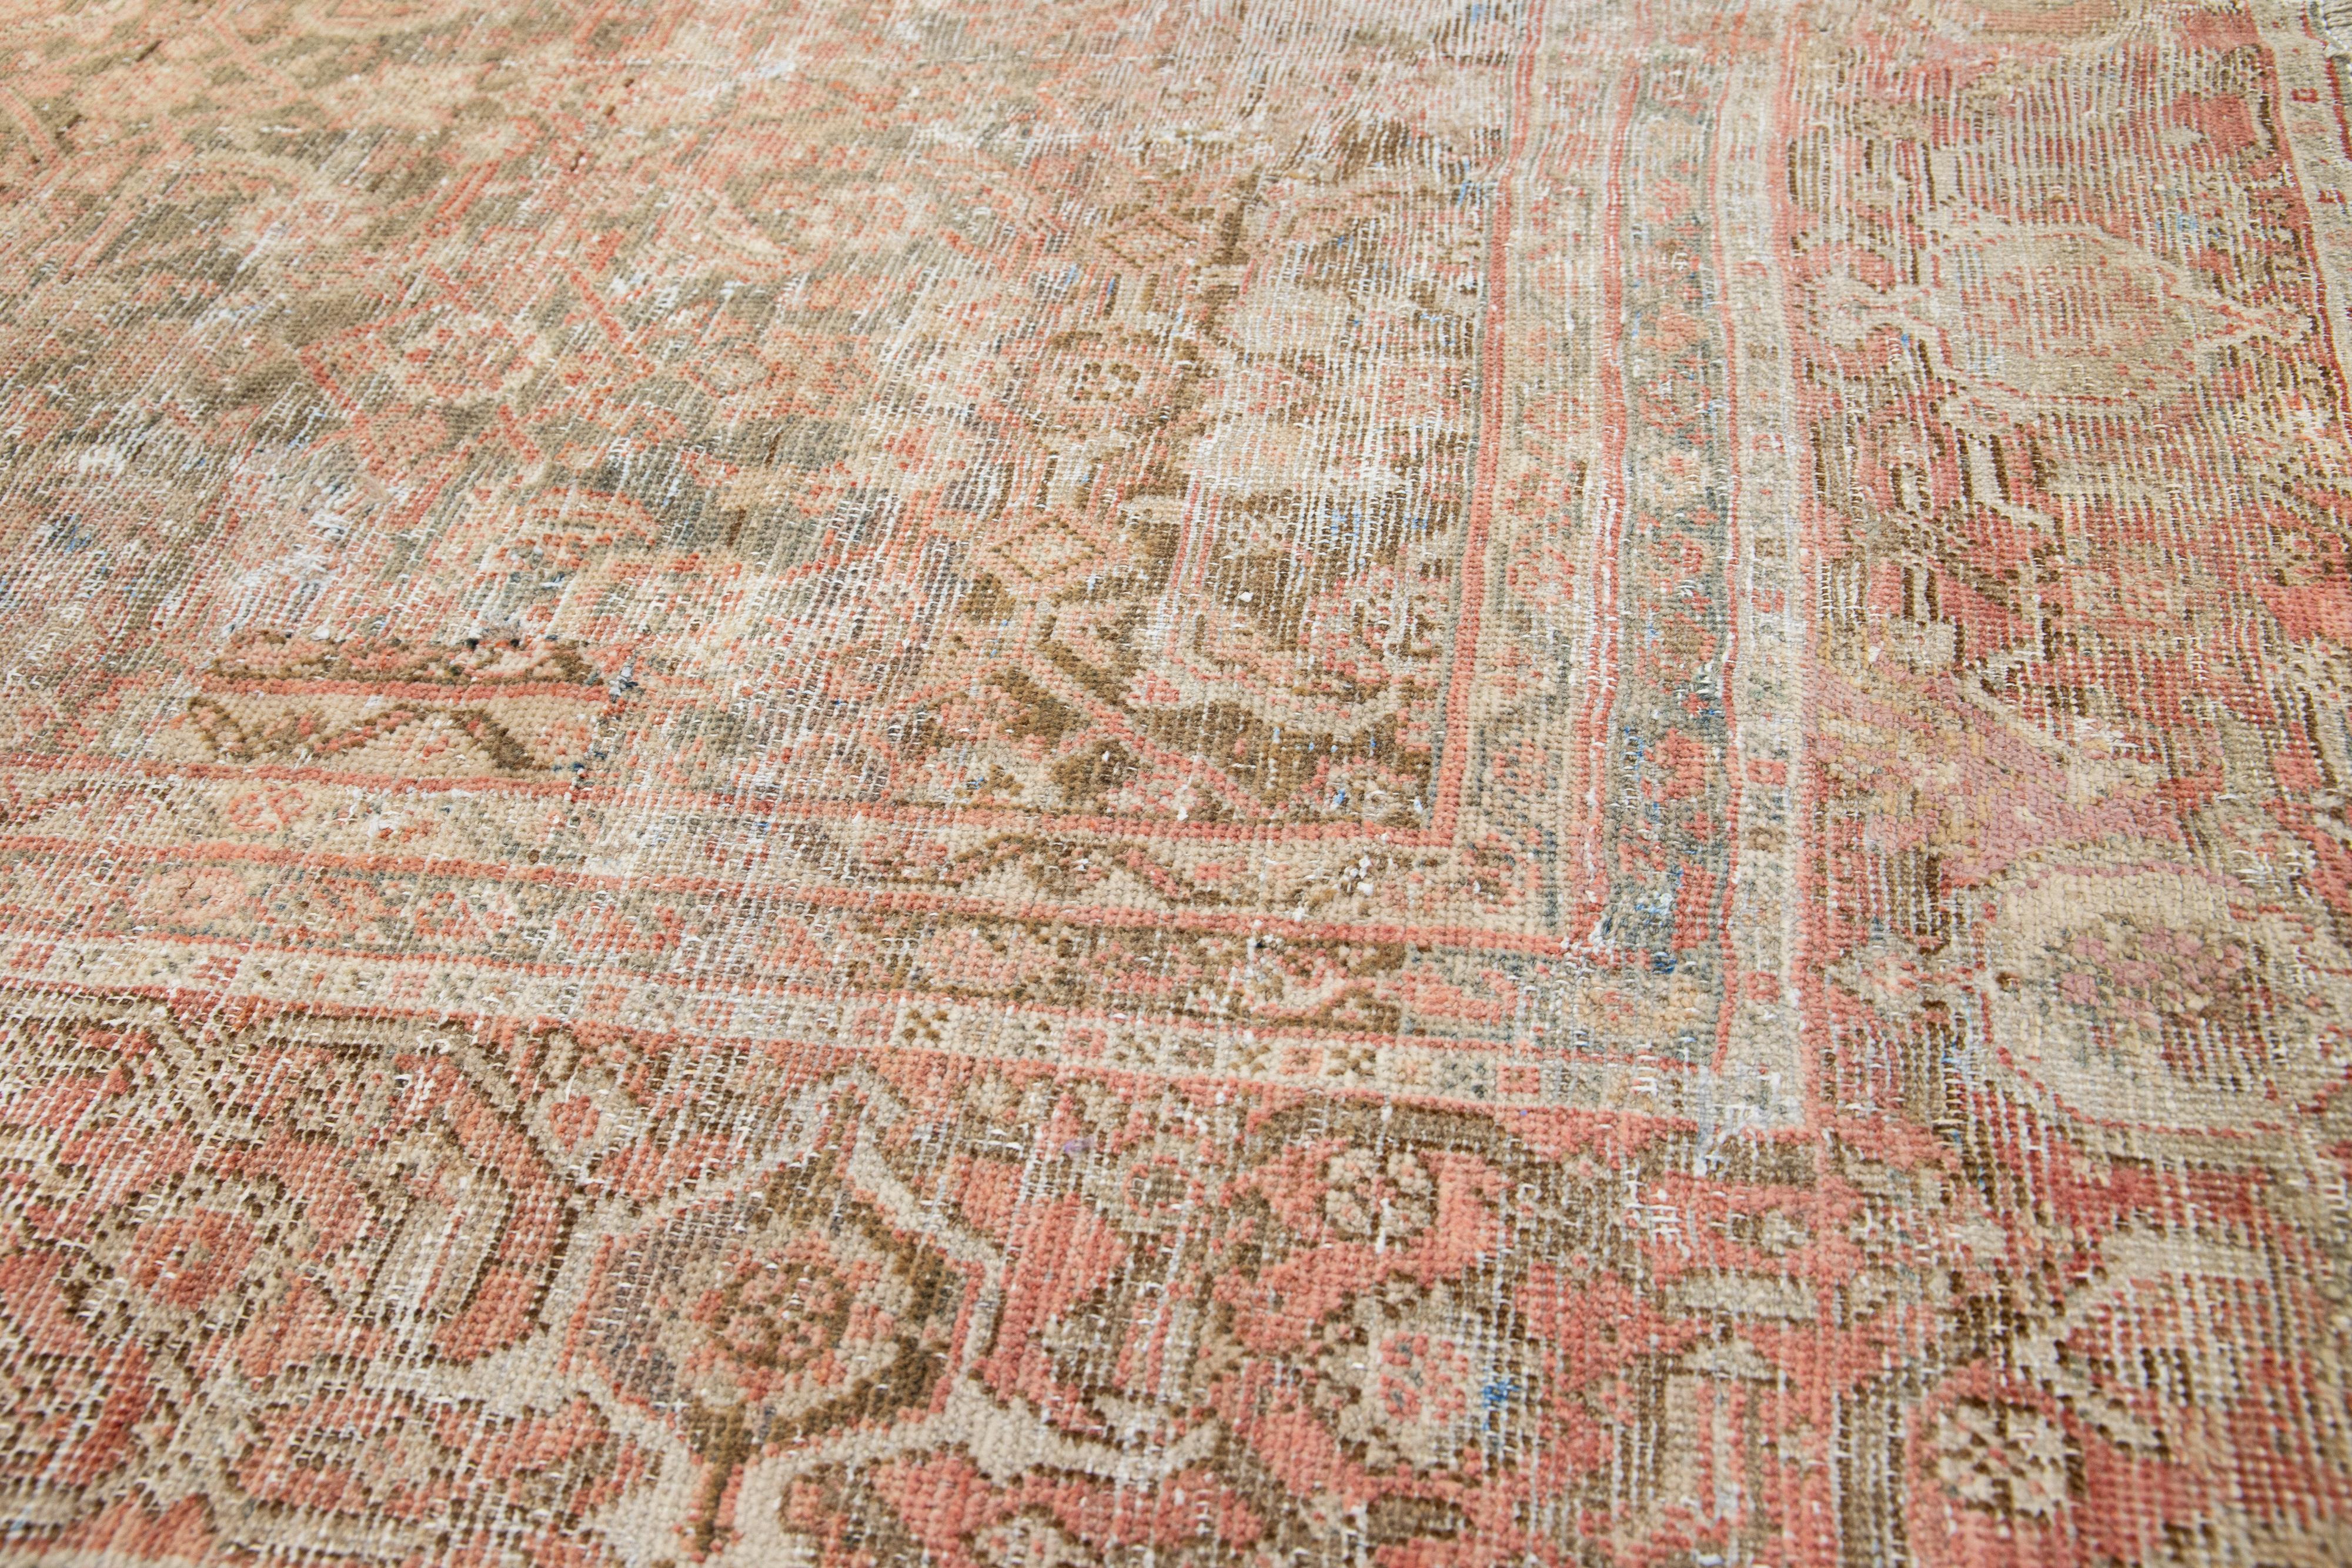 Antique Persian Tabriz Wool Rug with Rust Allover Design from the 1910s For Sale 3